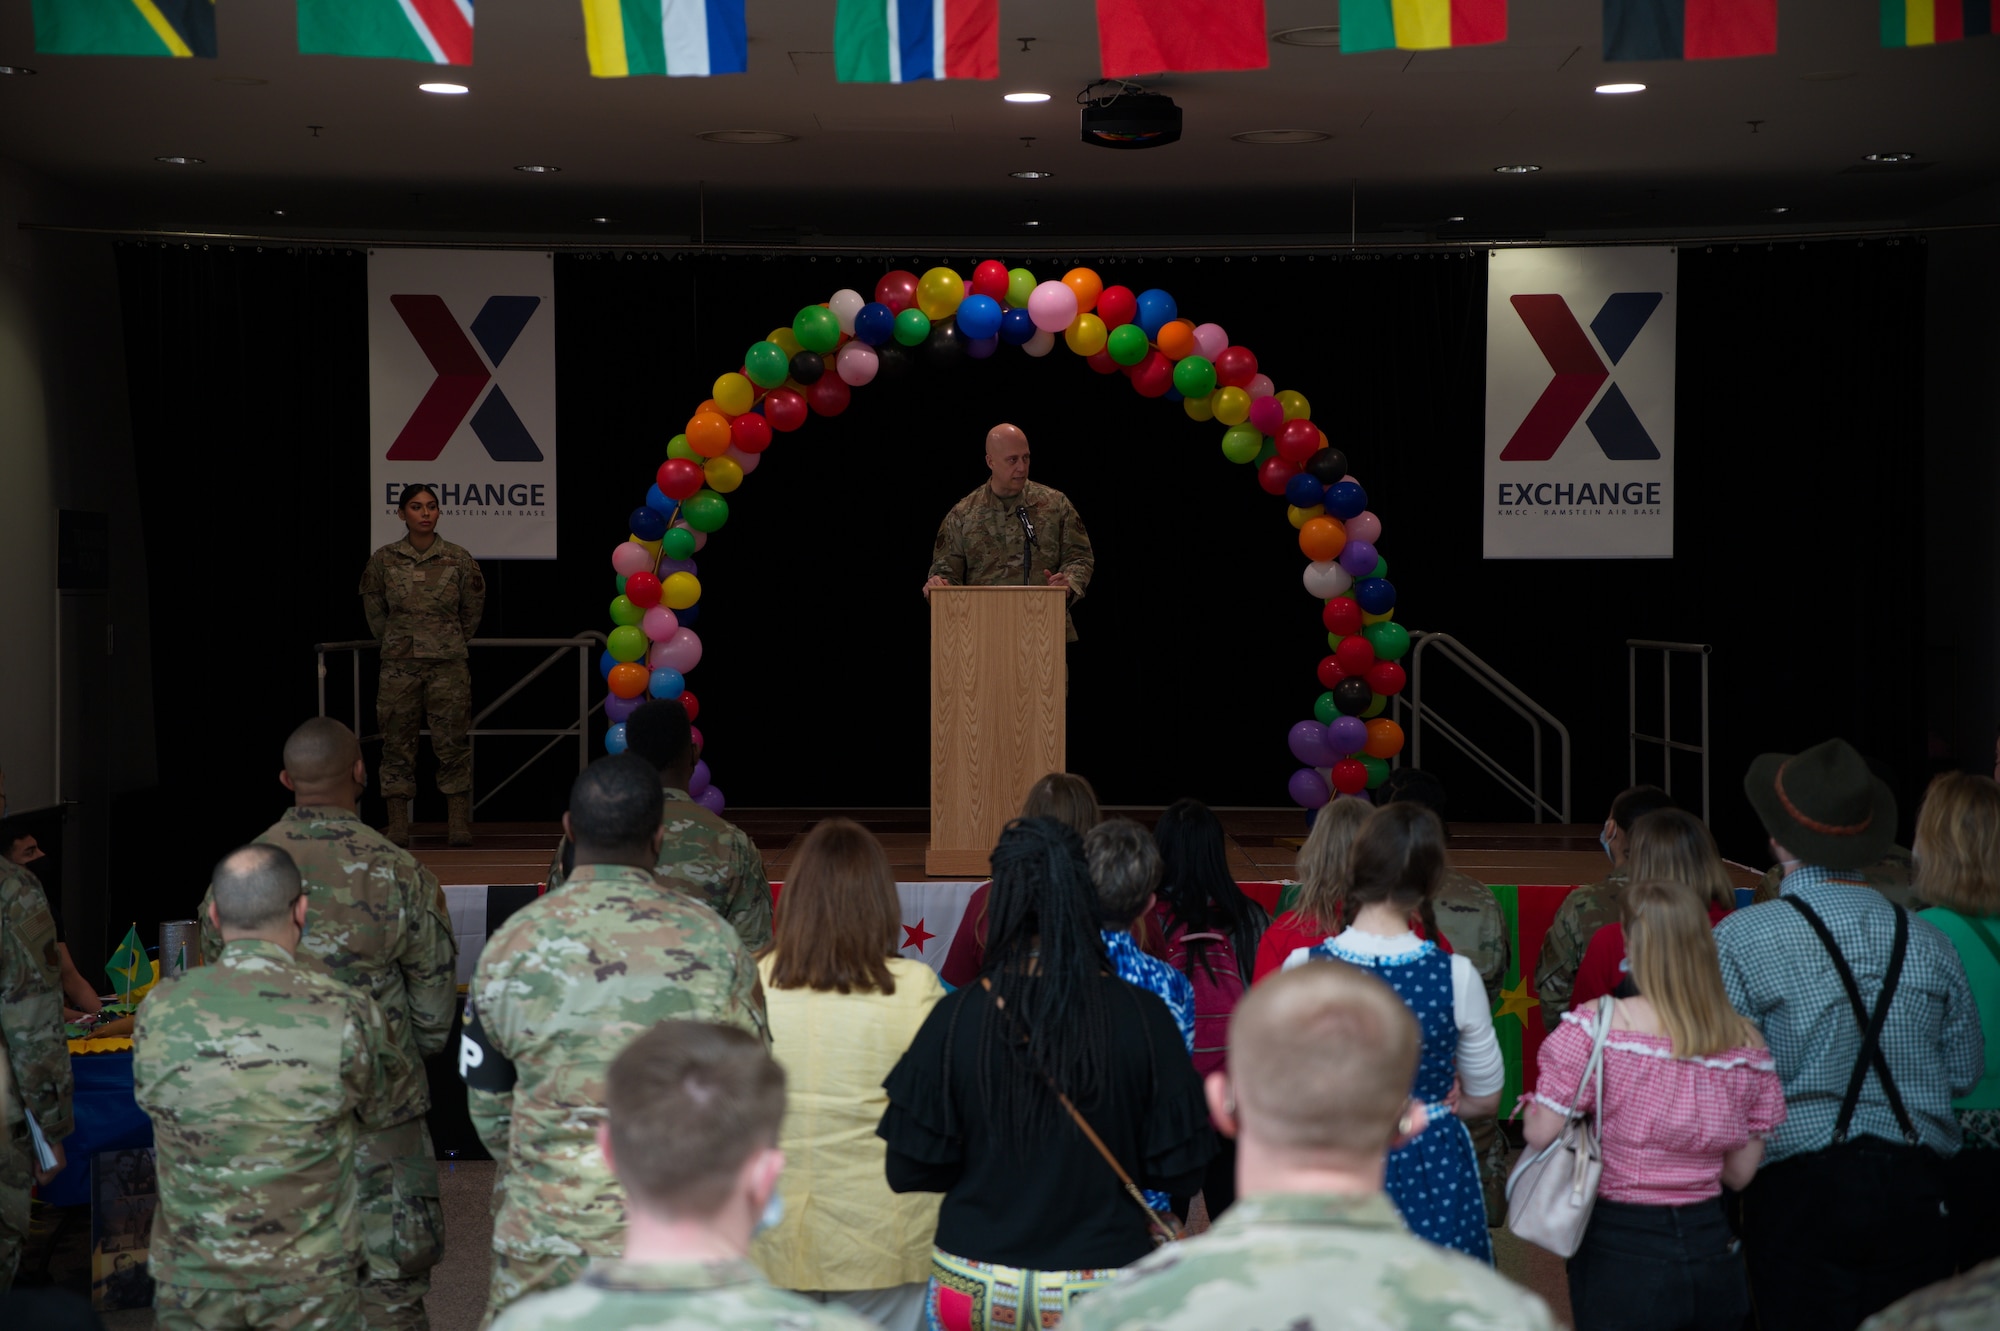 U.S. Air Force Brig. Gen. Josh Olson, 86th Airlift Wing commander, gives opening remarks at Diversity Day 2022 on Ramstein Air Base, Germany, March 24, 2022. The event aimed to enhance cross-cultural and cross-gender awareness while promoting harmony among all military members, their families and the DOD civilian workforce. (U.S. Air Force photo by Senior Airman Branden Rae)